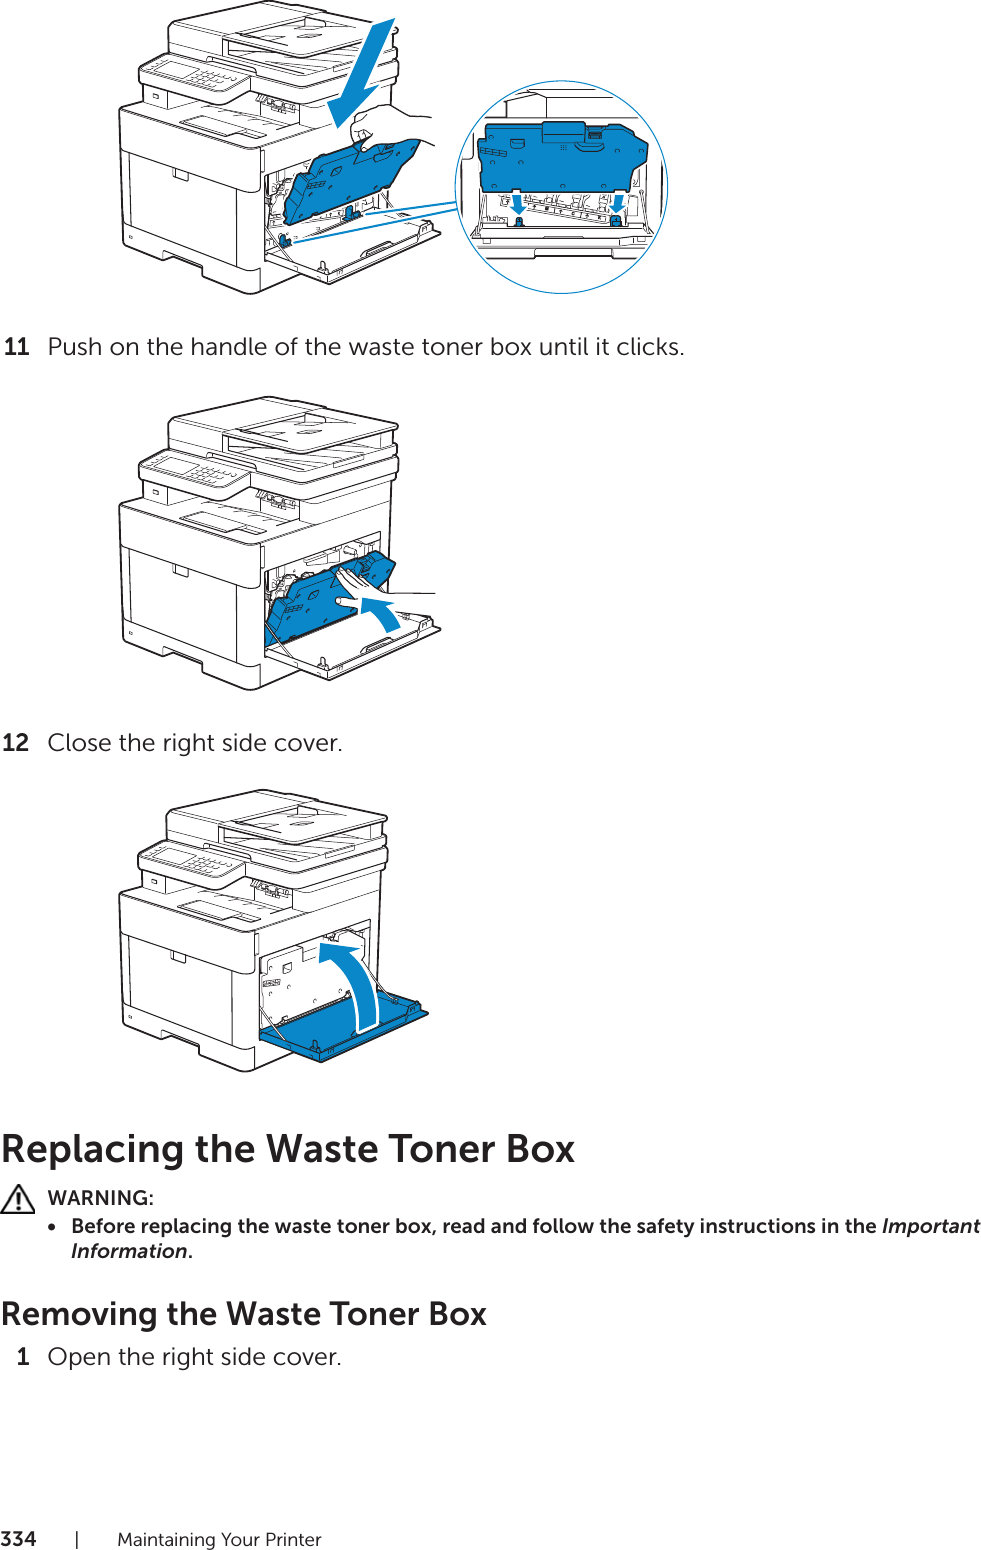 334| Maintaining Your Printer11 Push on the handle of the waste toner box until it clicks.12 Close the right side cover.Replacing the Waste Toner BoxWARNING:• Before replacing the waste toner box, read and follow the safety instructions in the Important Information.Removing the Waste Toner Box1Open the right side cover.YMCK